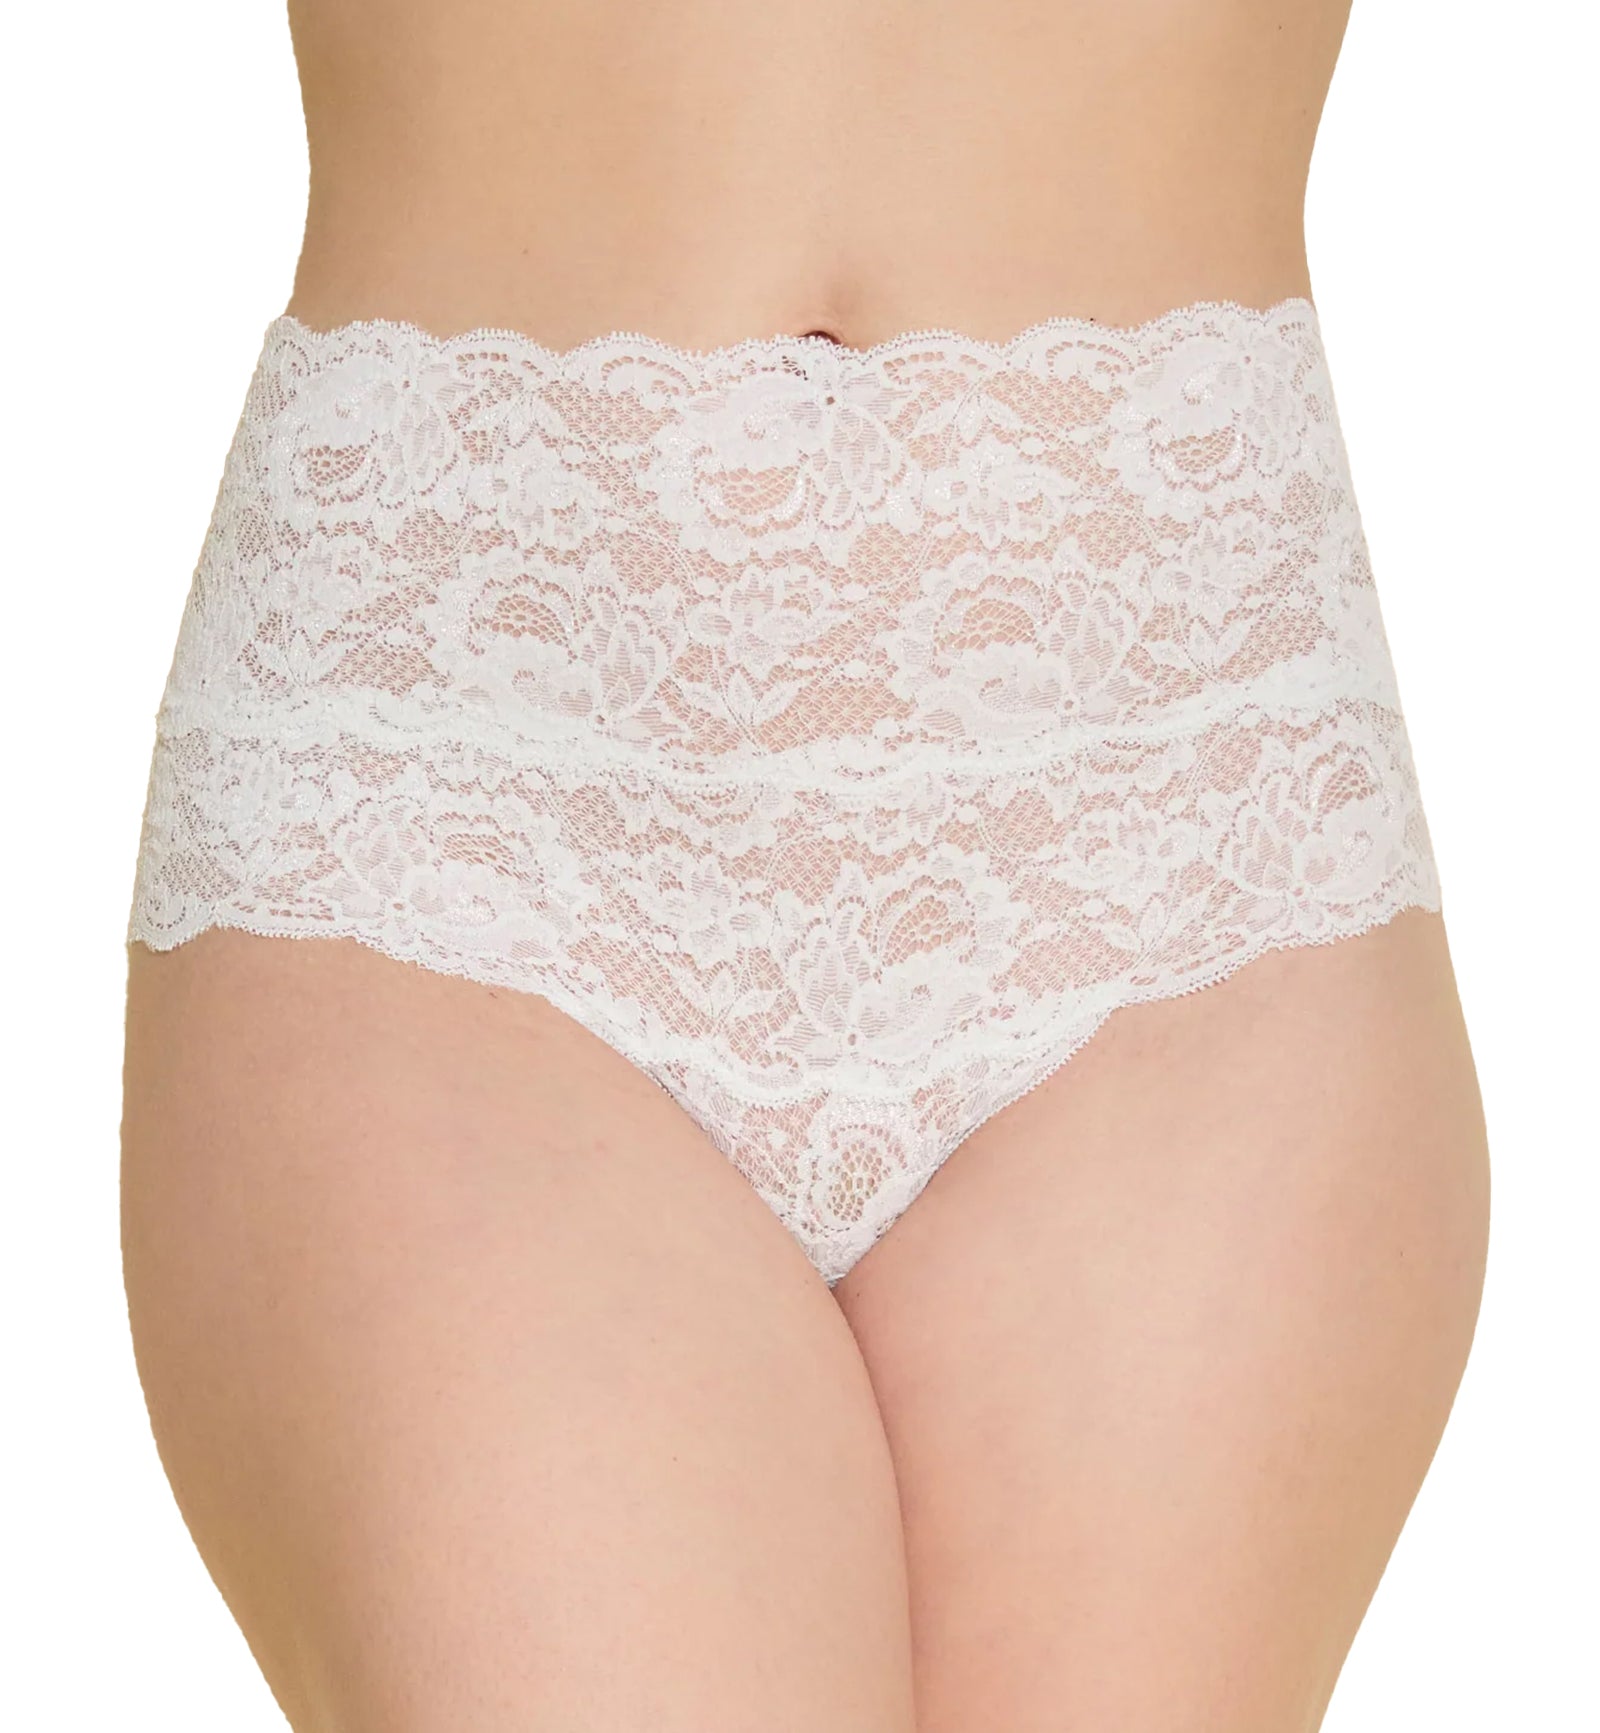 Cosabella Never Say Never High Rise Thong (NEVER0361),S/M,Moon Ivory - Moon Ivory,S/M